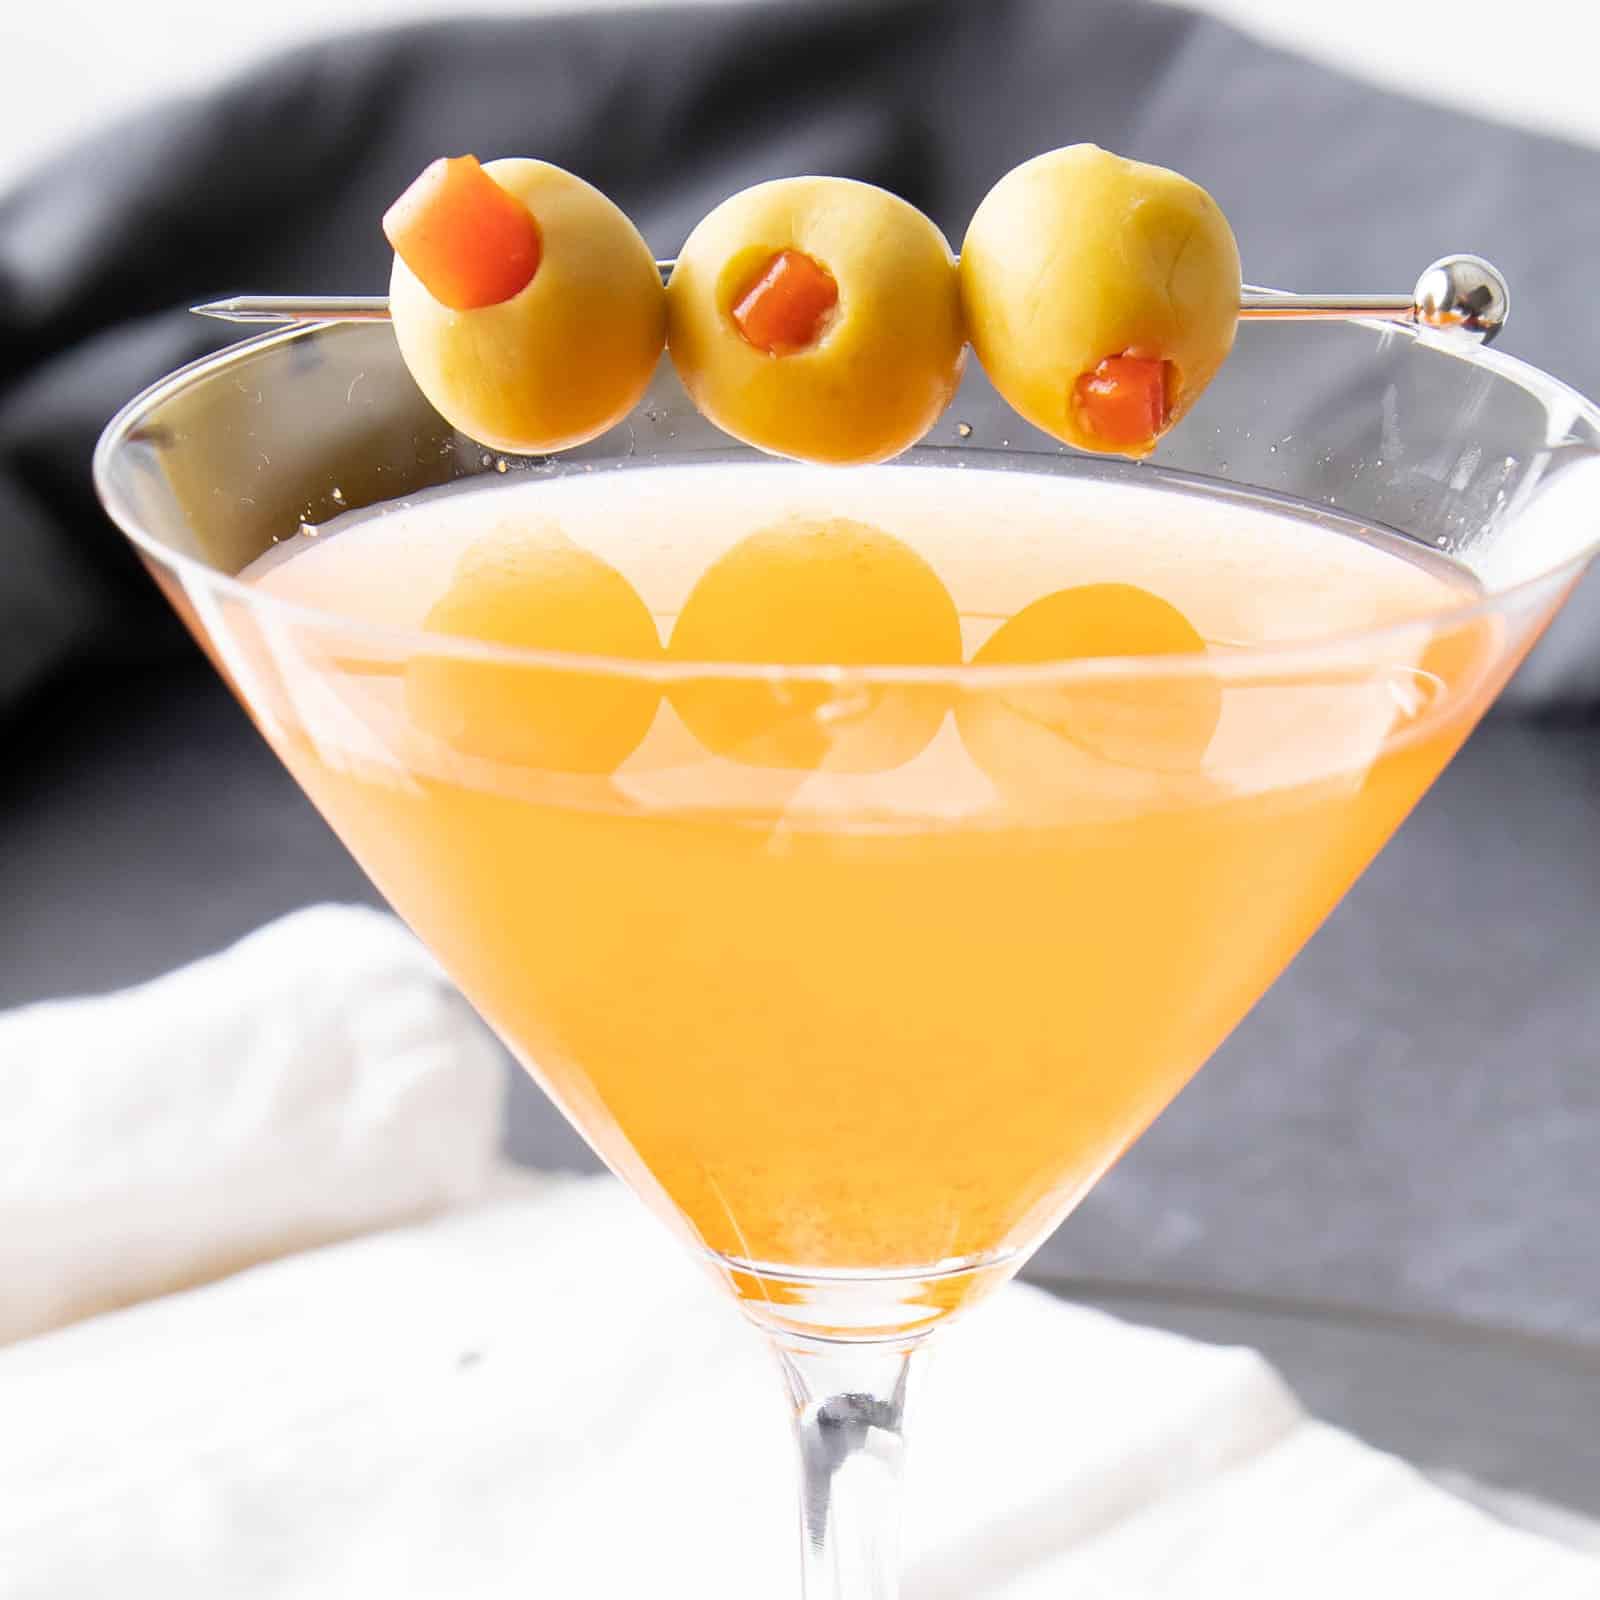 Hot and Dirty Martini